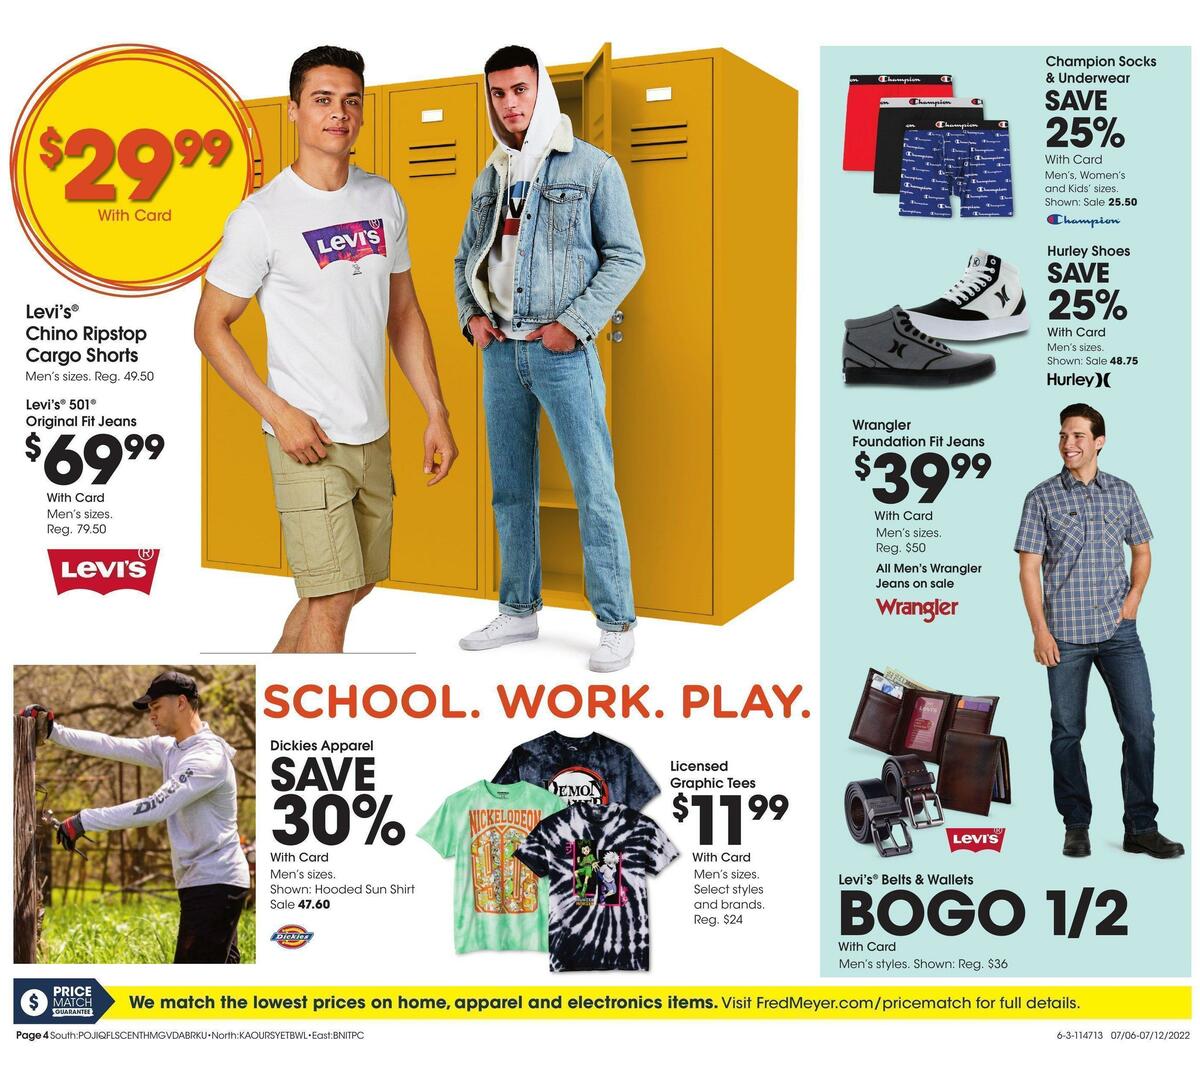 Fred Meyer General Merchandise Weekly Ad from July 6